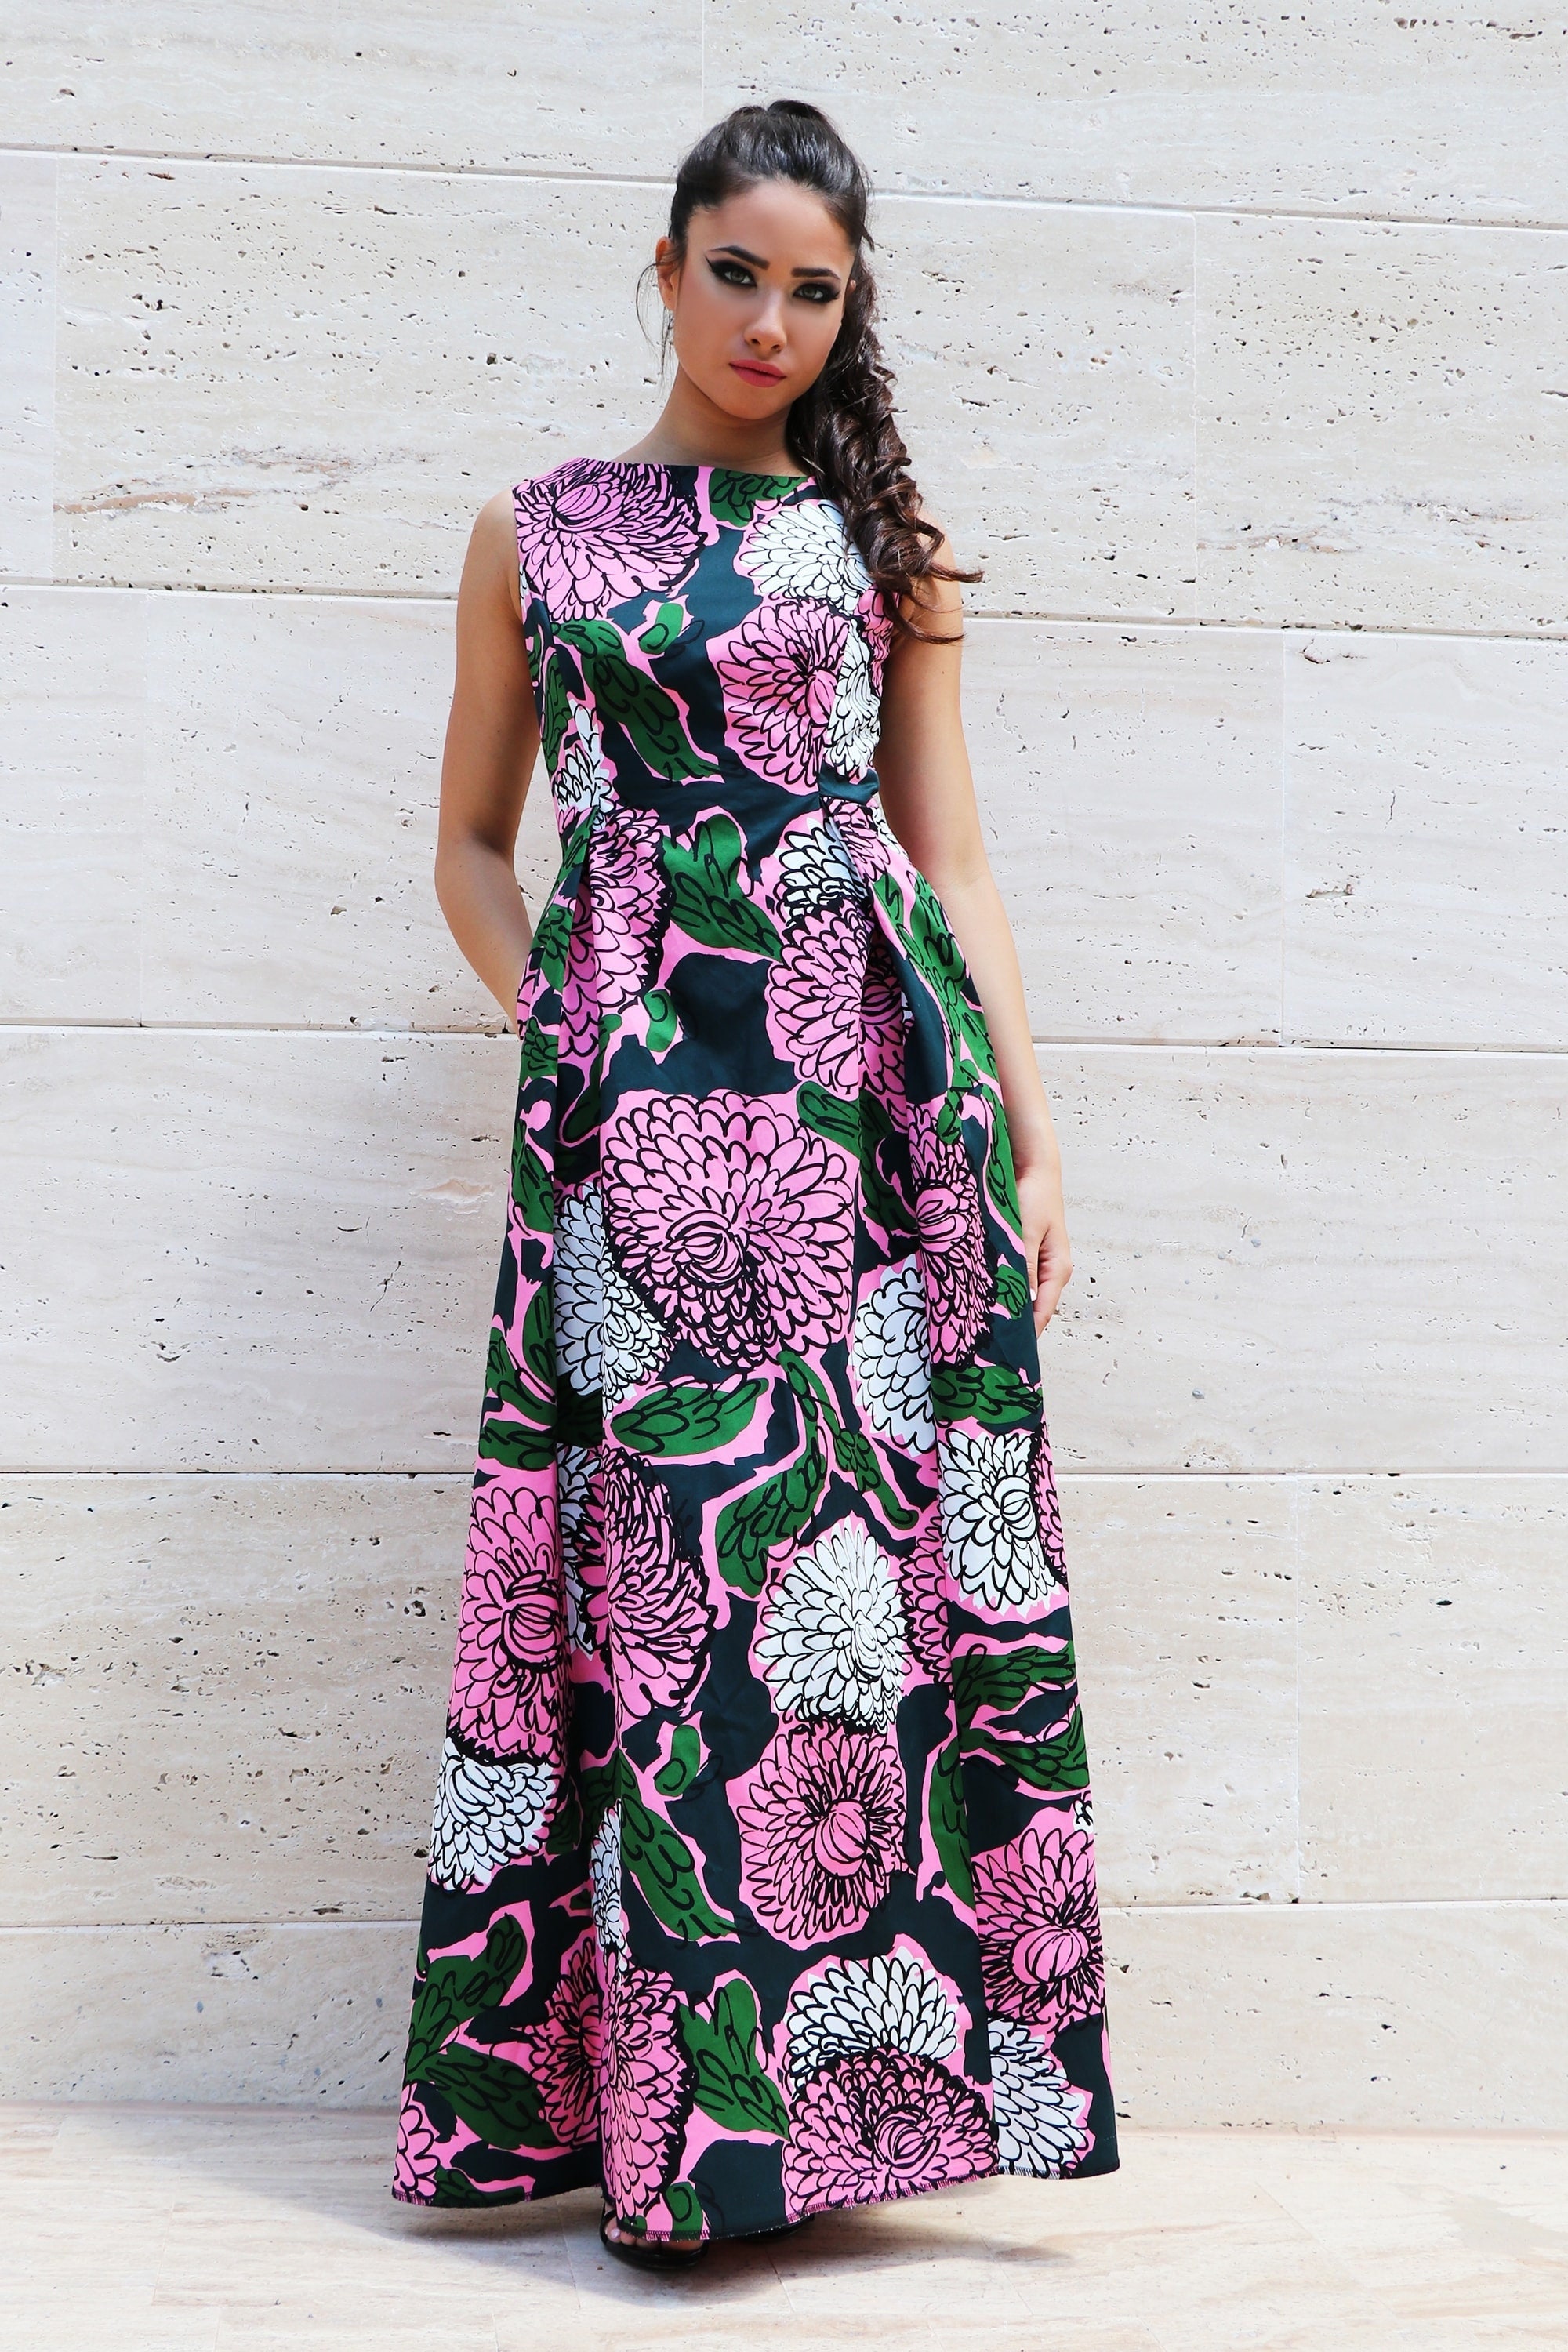 Floral Maxi Dress Sleeveless Dress for Special Occasion - Etsy